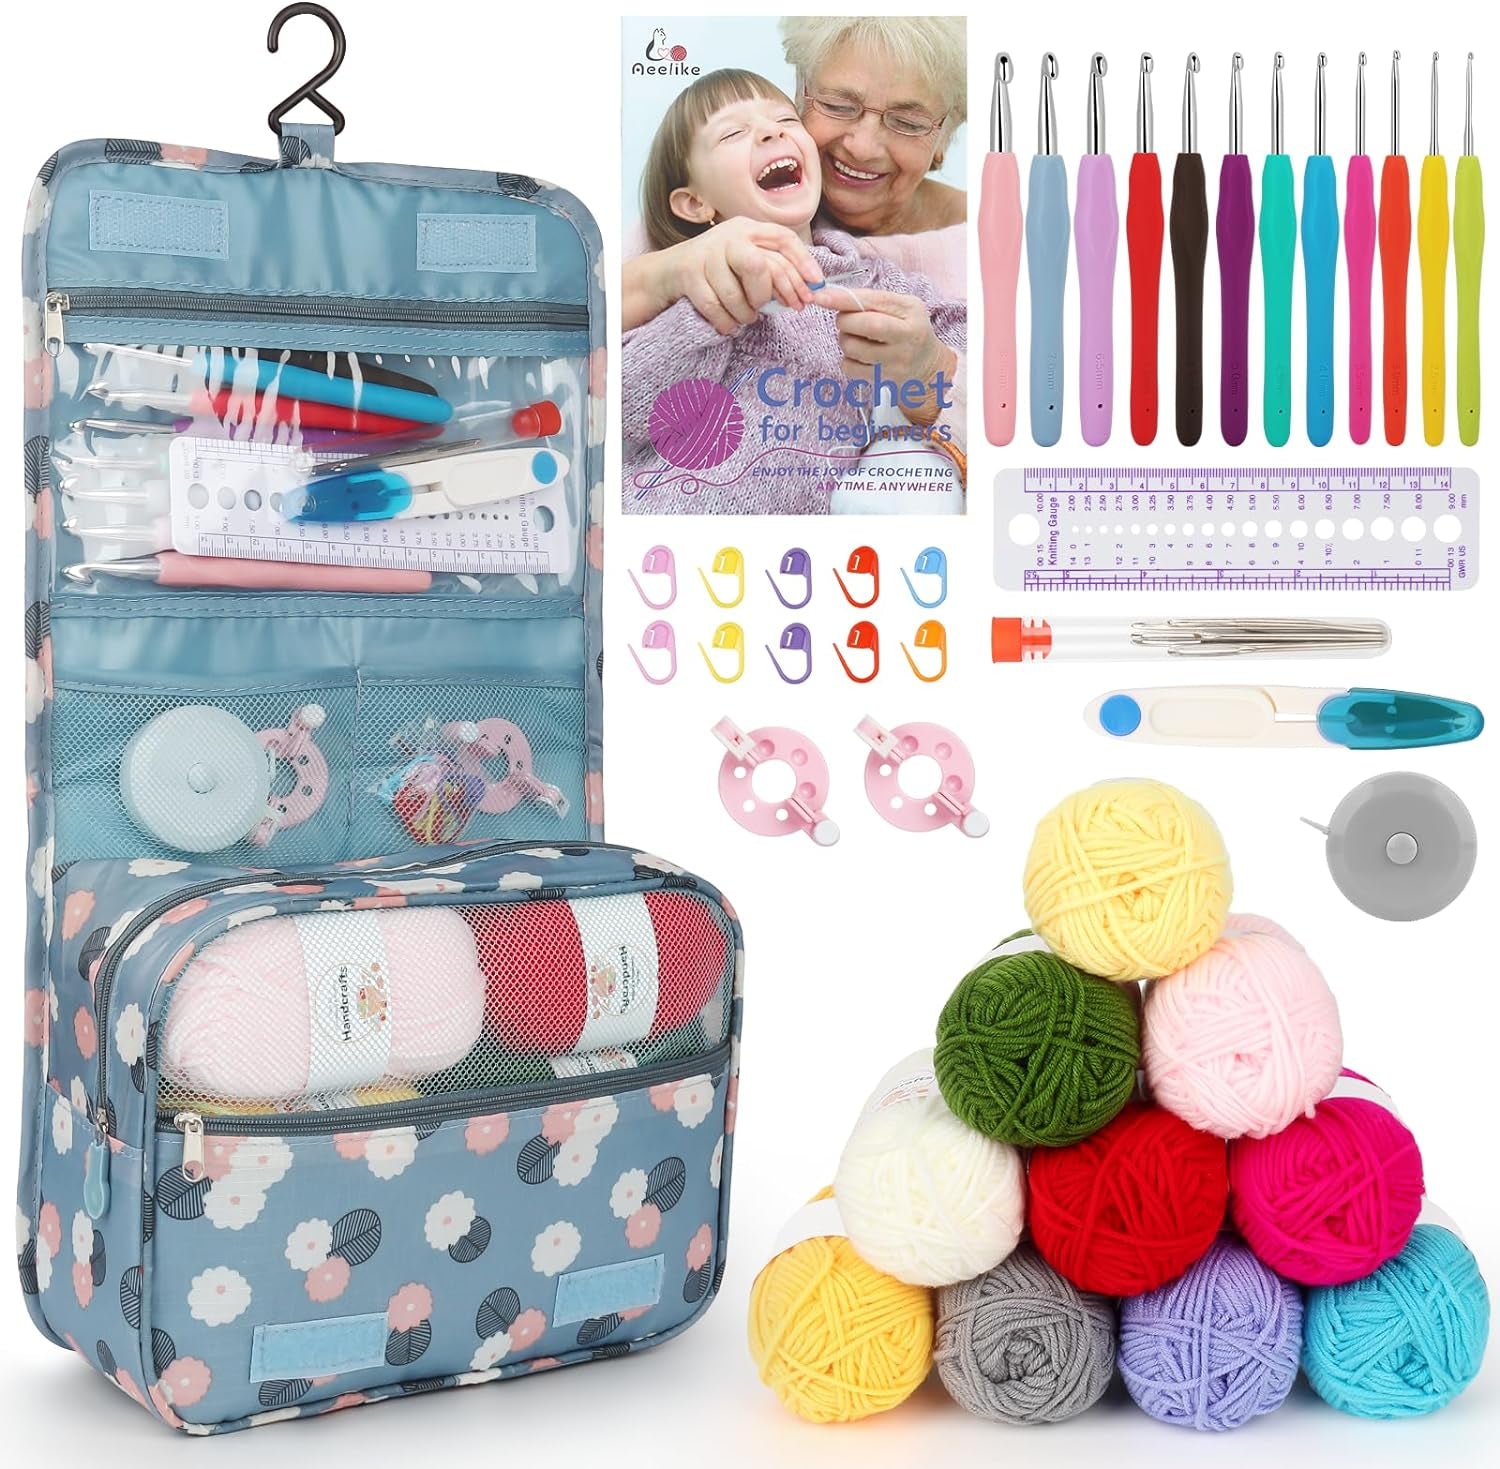 Crochet Kit for Beginners with 15 Colors Yarn and Introduction Book, 71Pcs Crochet Starter Kit Everything for Adult, Learn to Crochet Kit with Soft Grip Crochet Hooks and Blue Cat Bag